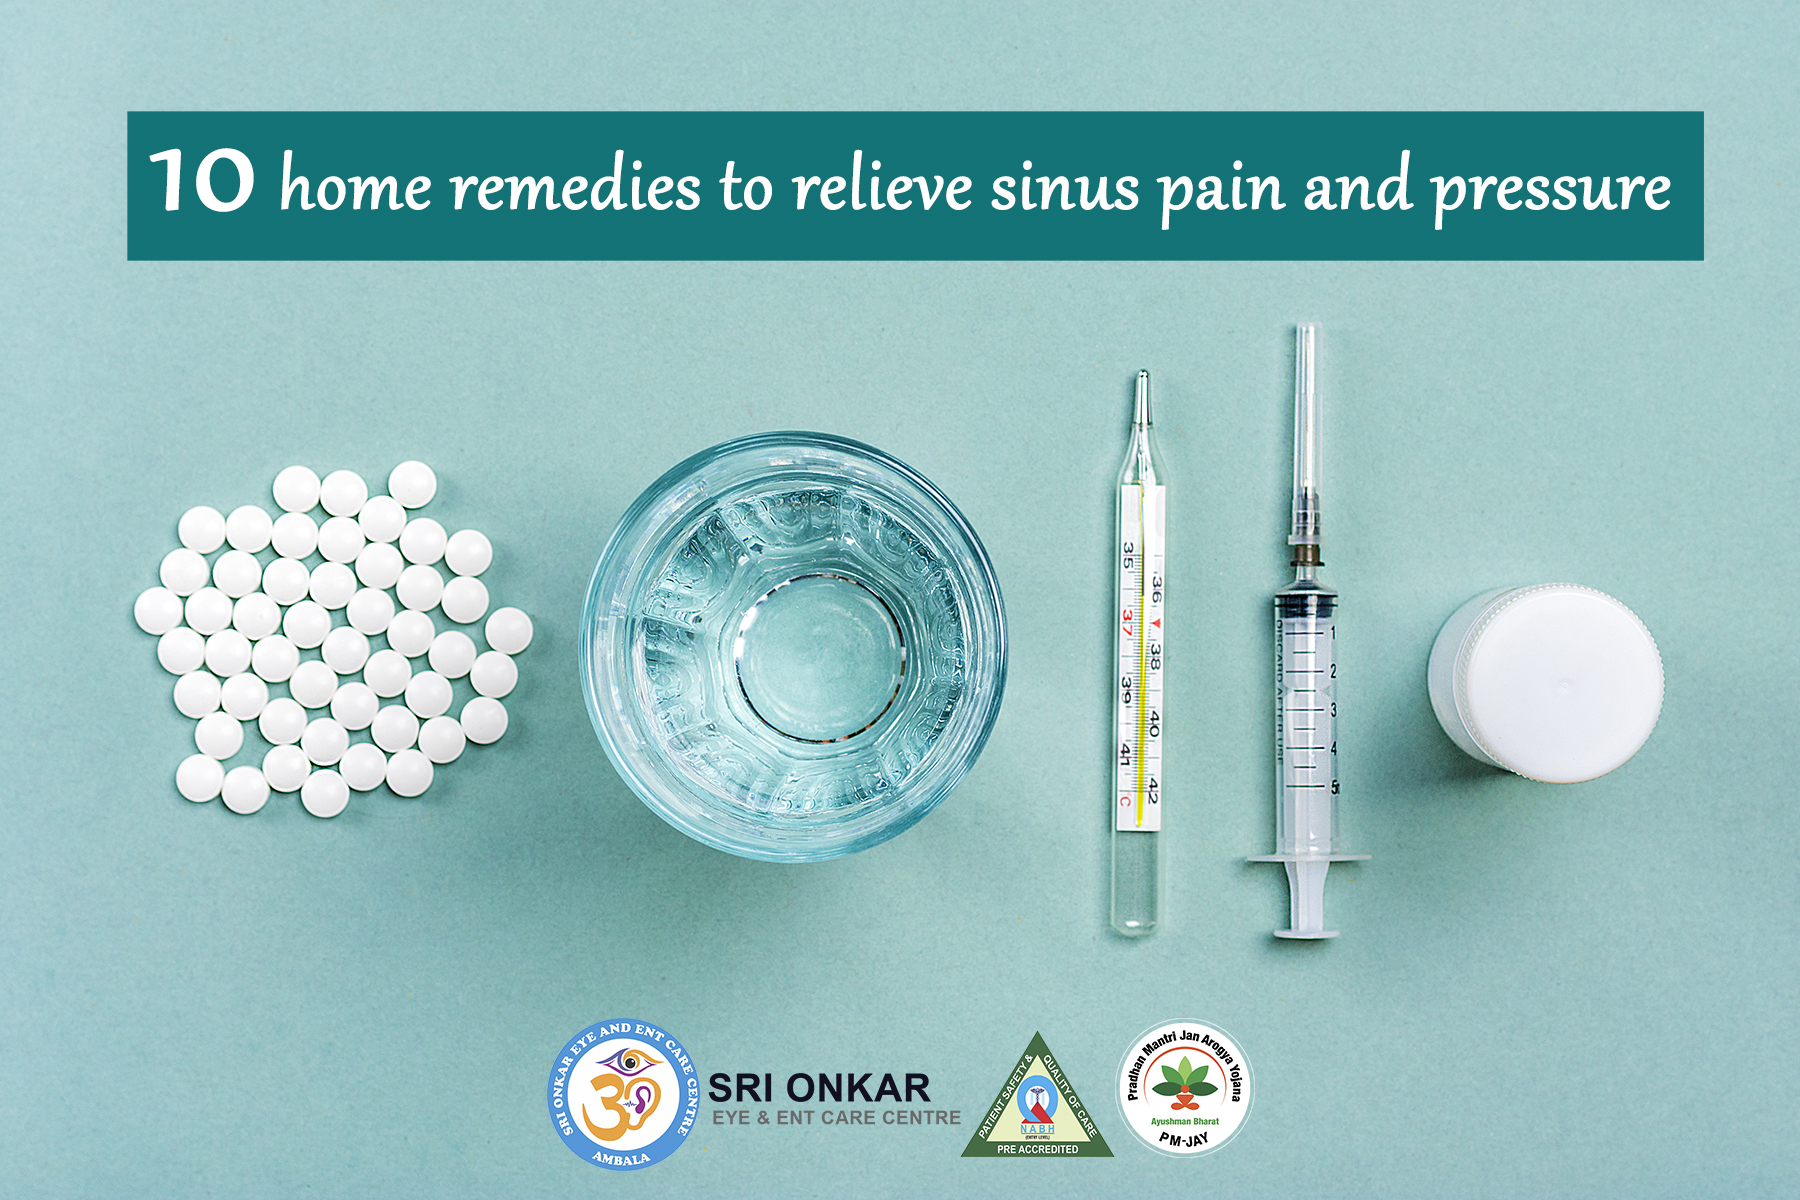 Ten home remedies to relieve sinus pain and pressure | Sri Onkar Eye & ENT Care Centre